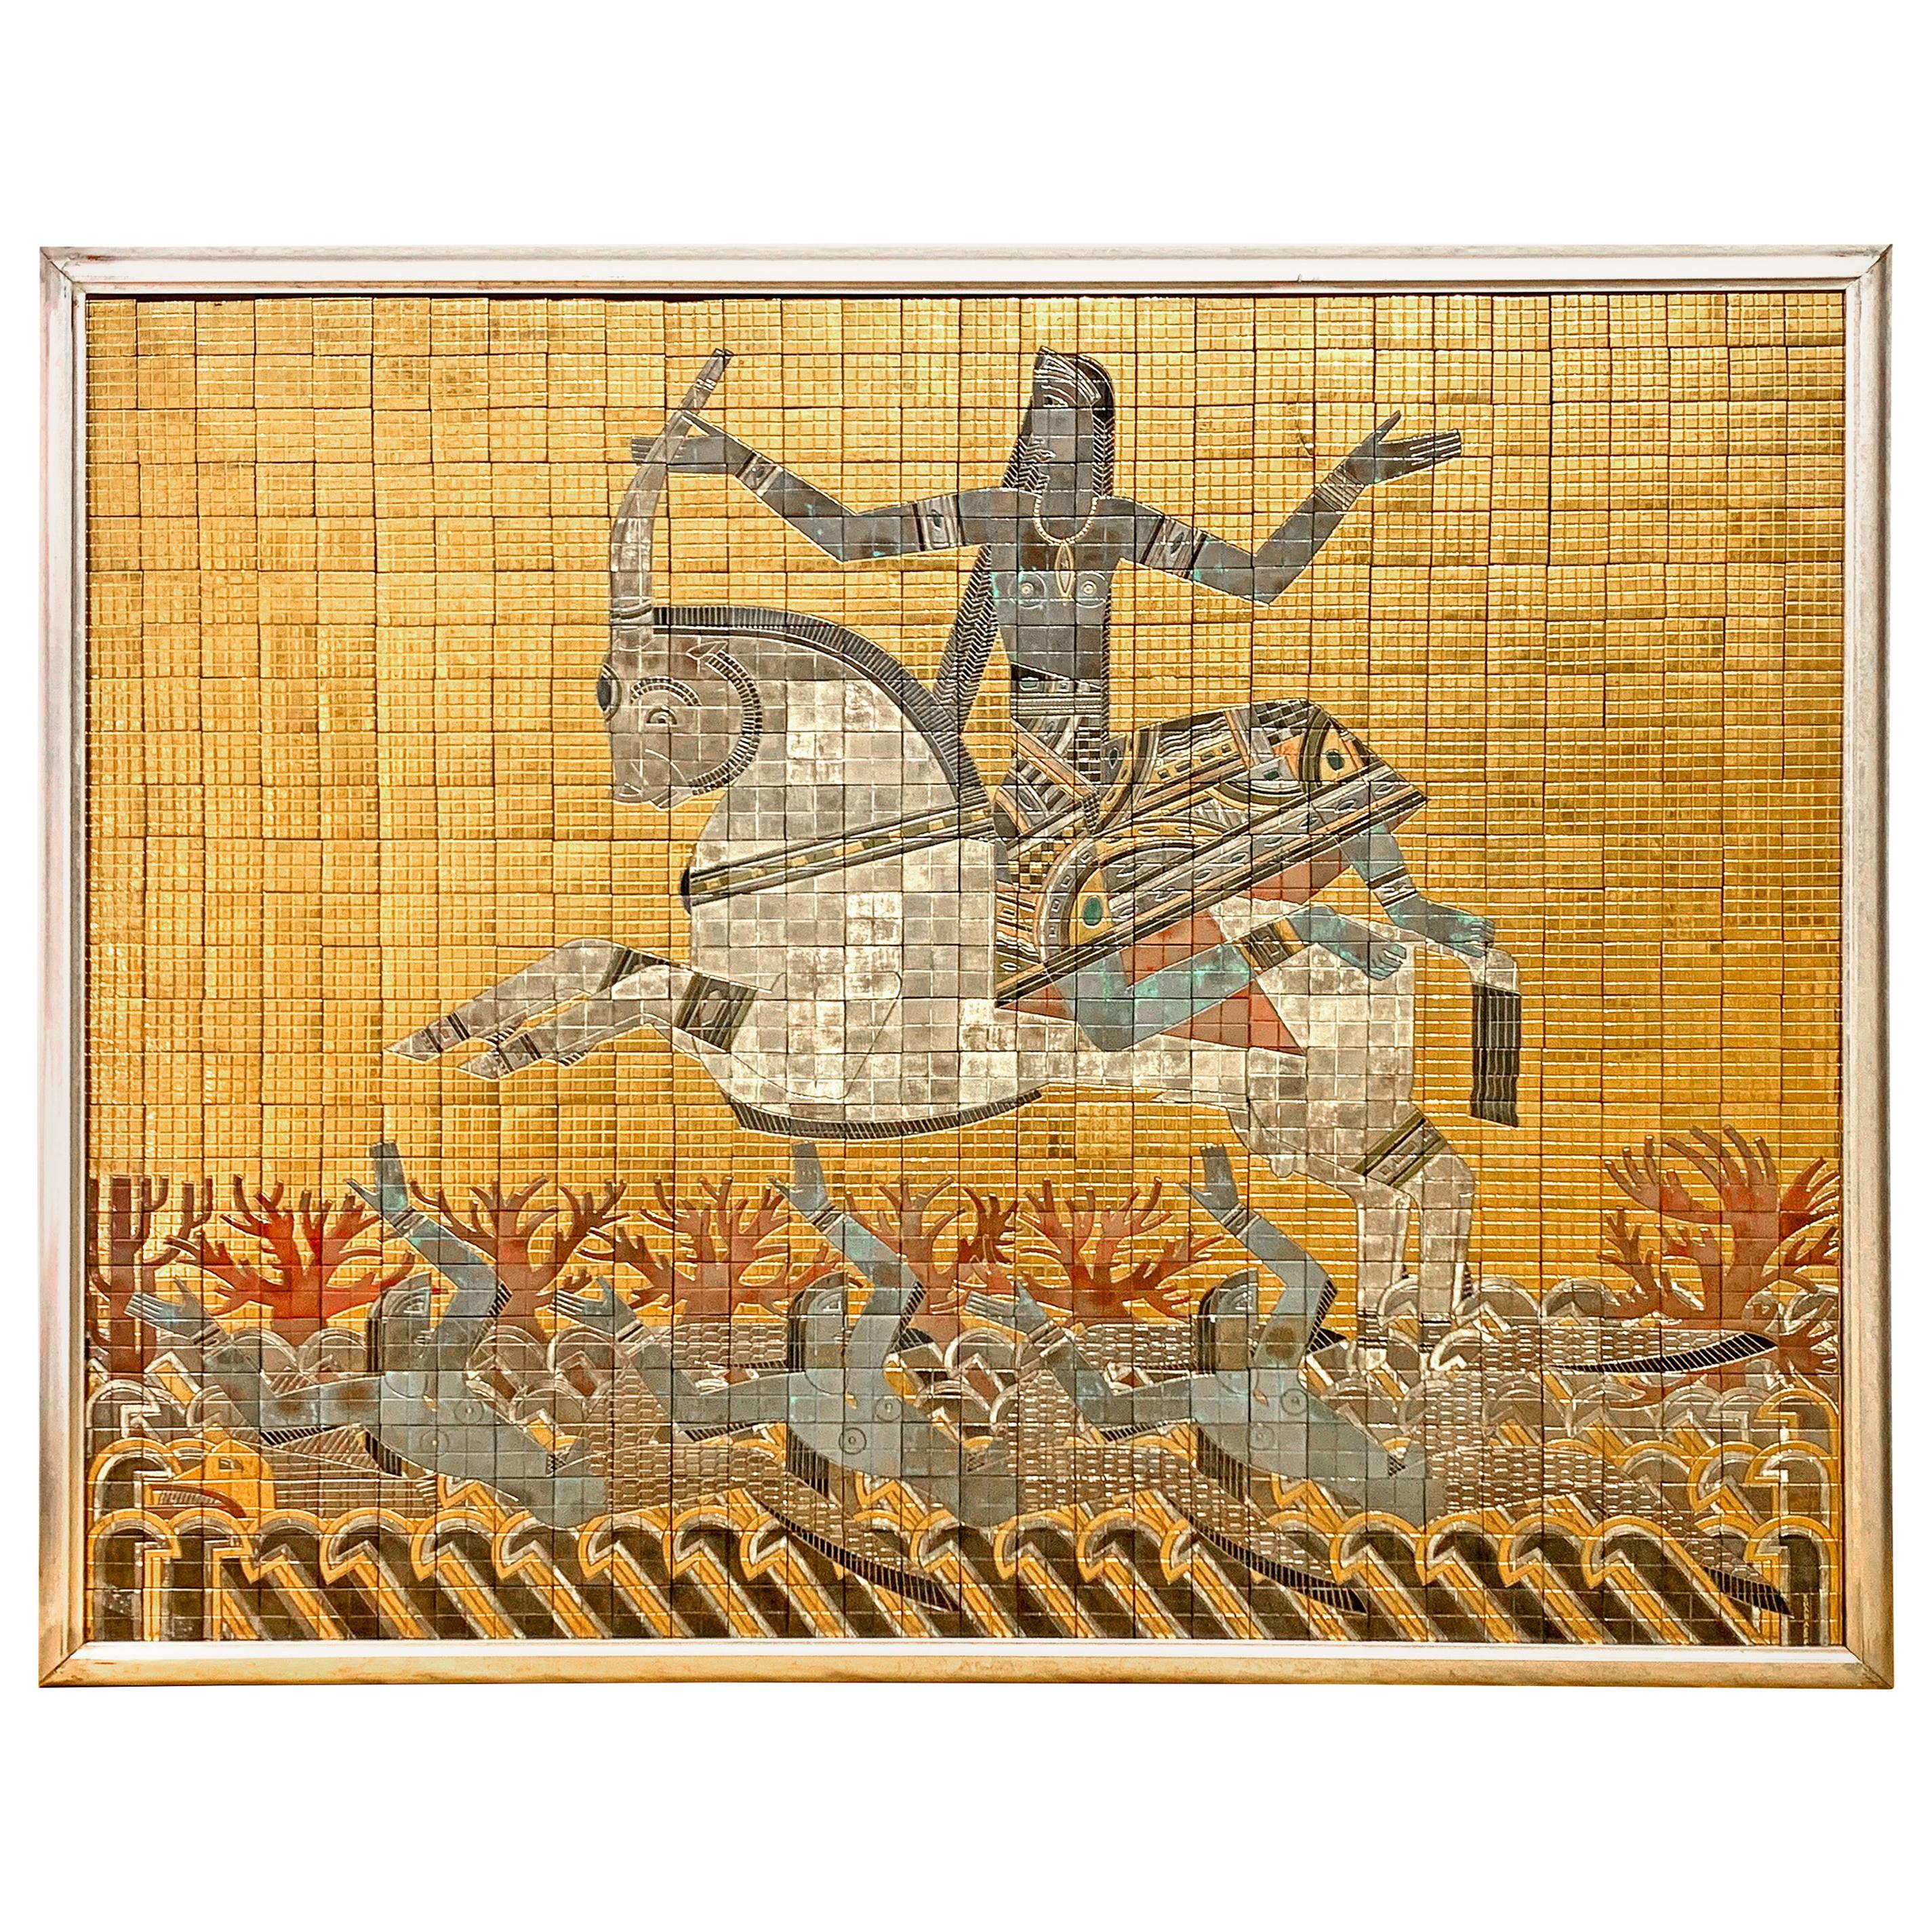 "Goddess Riding Bull, " Monumental Gold and Grey Art Deco Mosaic with Mermaids